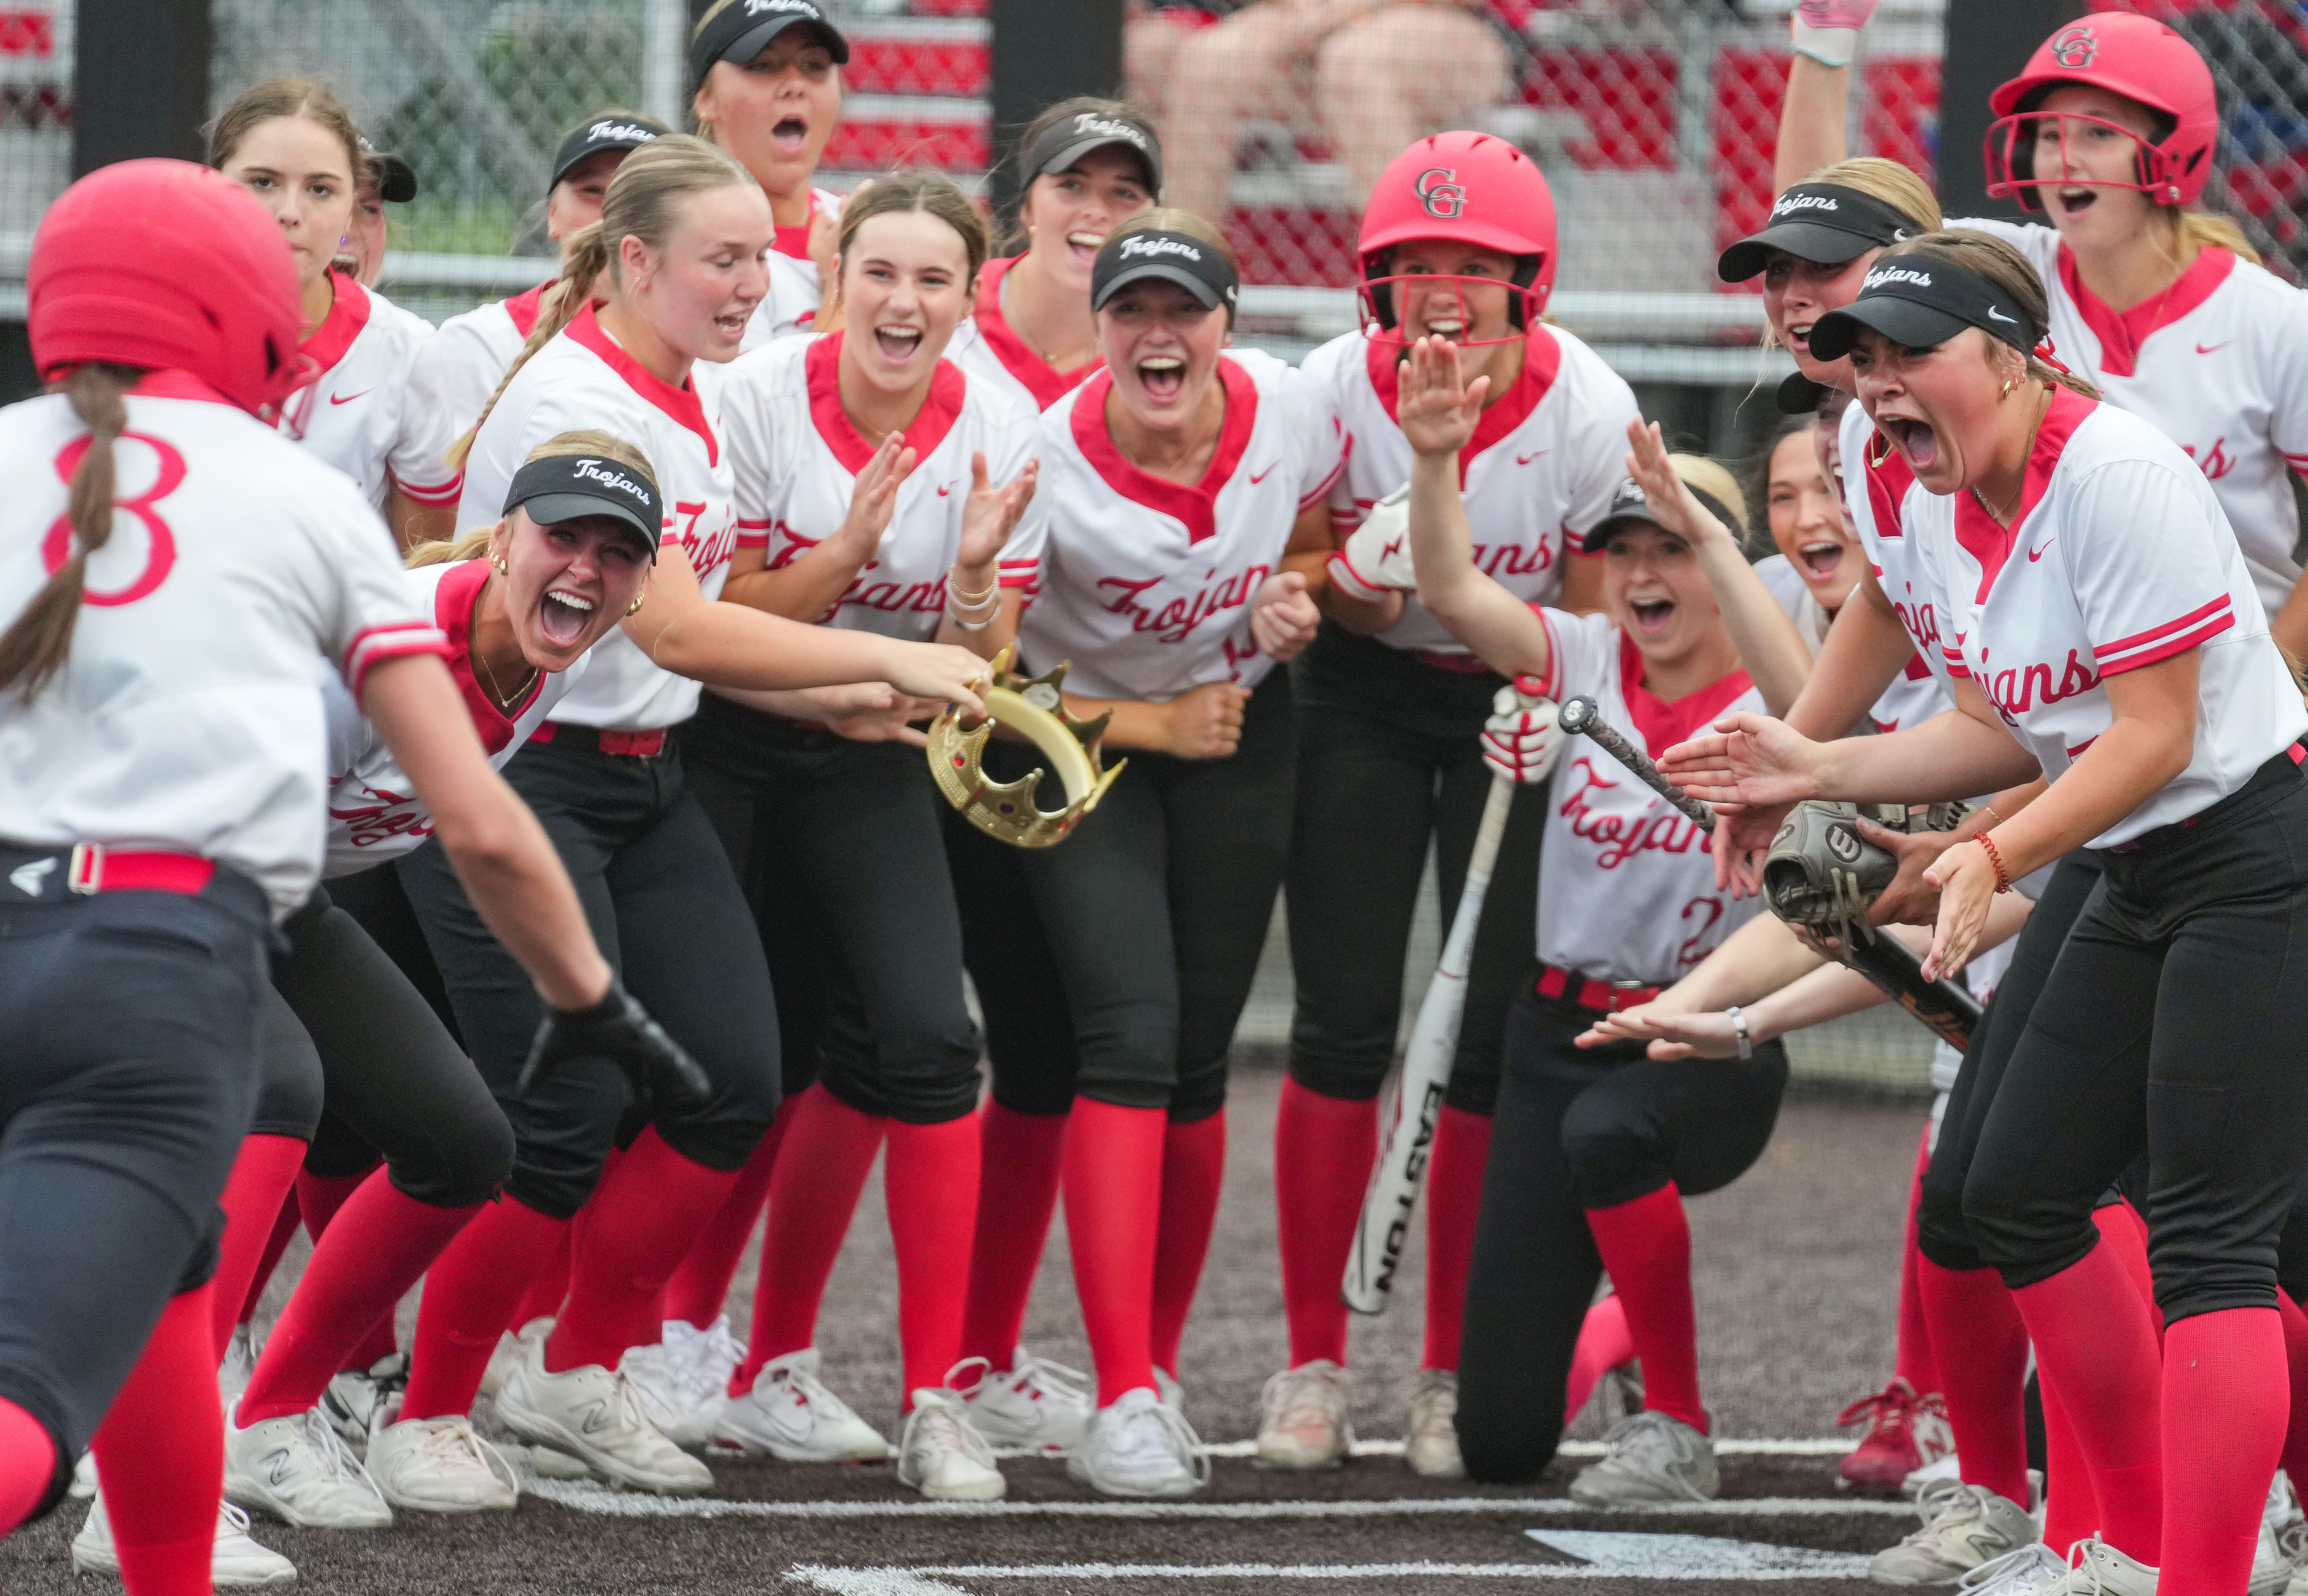 New Palestine returns to state with 5-inning blowout of Center Grove: 'They beat our best'